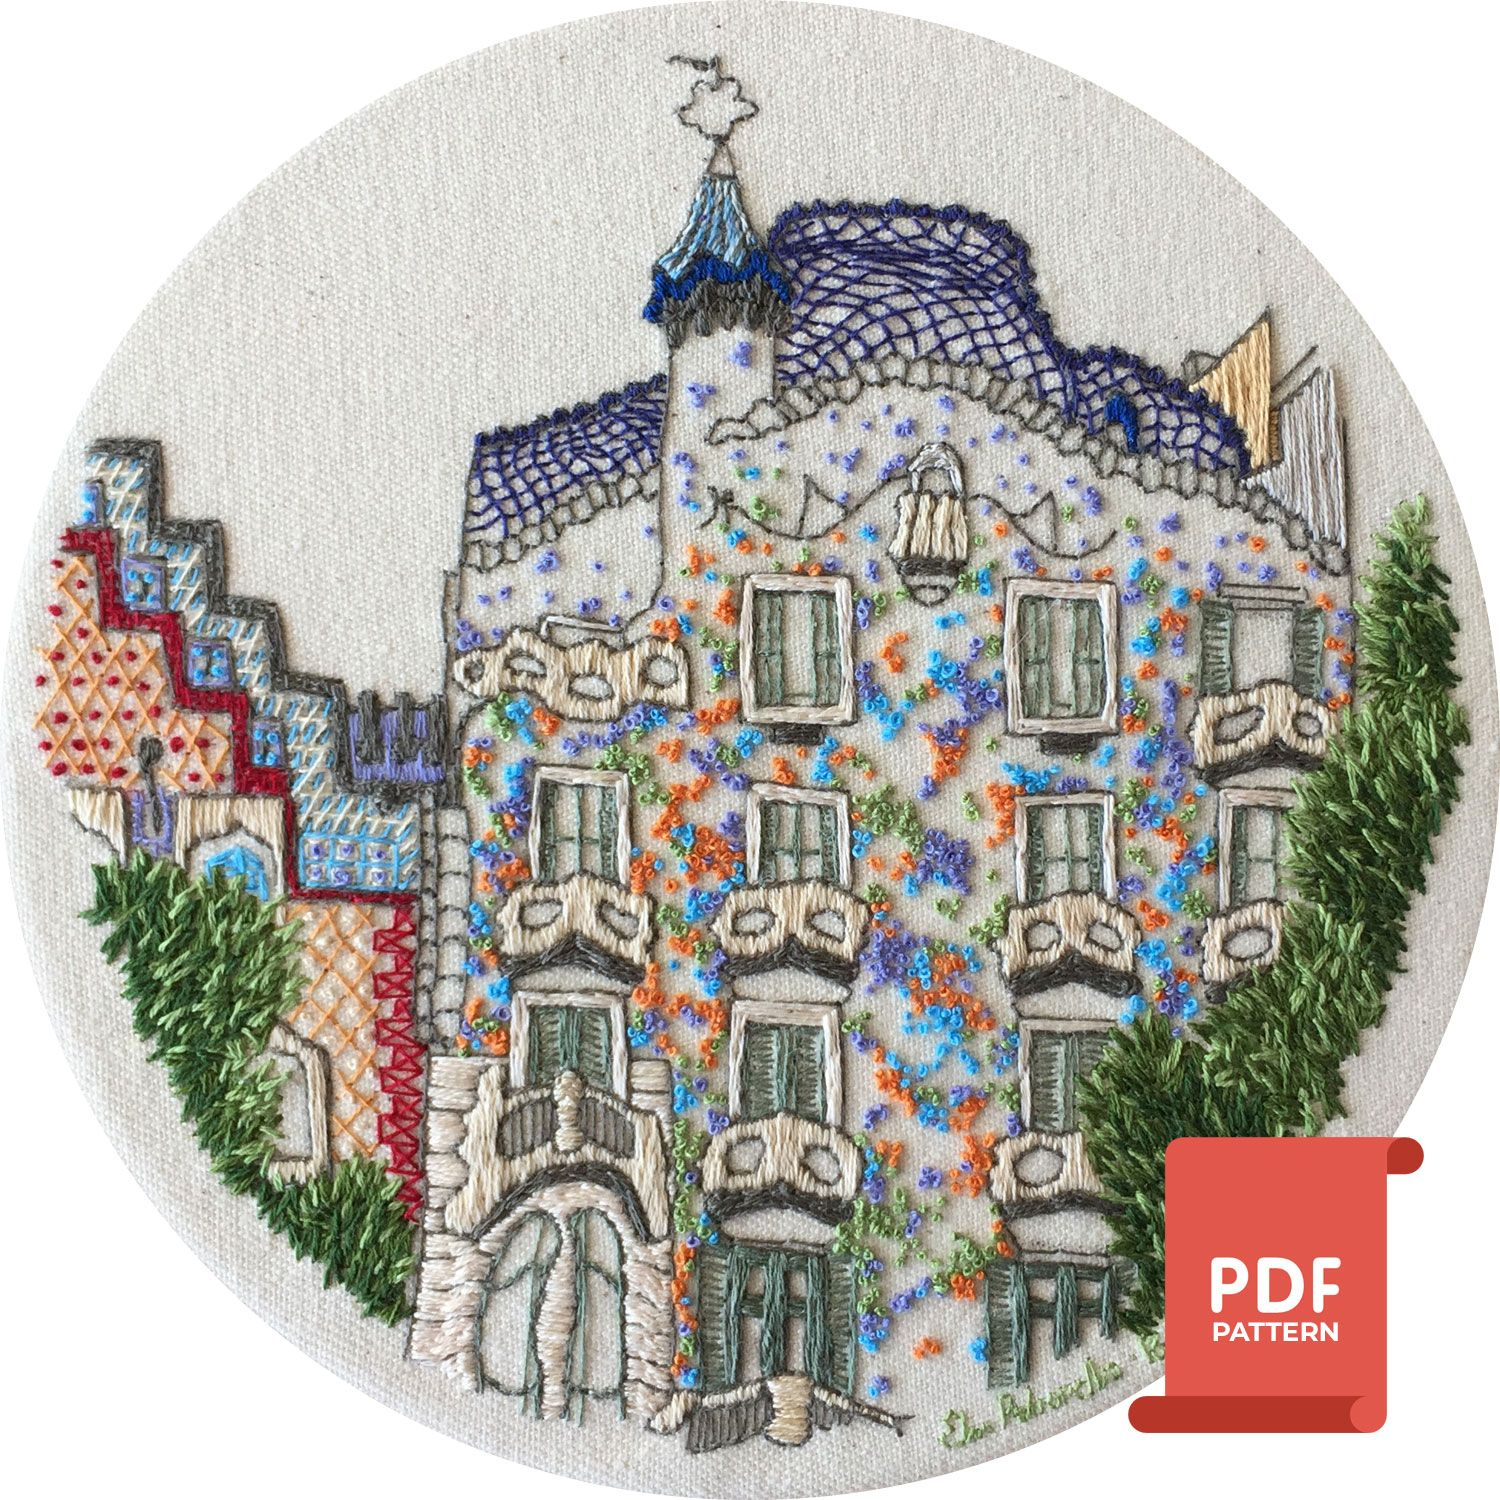 French Embroidery Patterns French Knot Pattern Of Casa Battlo Hand Embroidery Charles And Elin